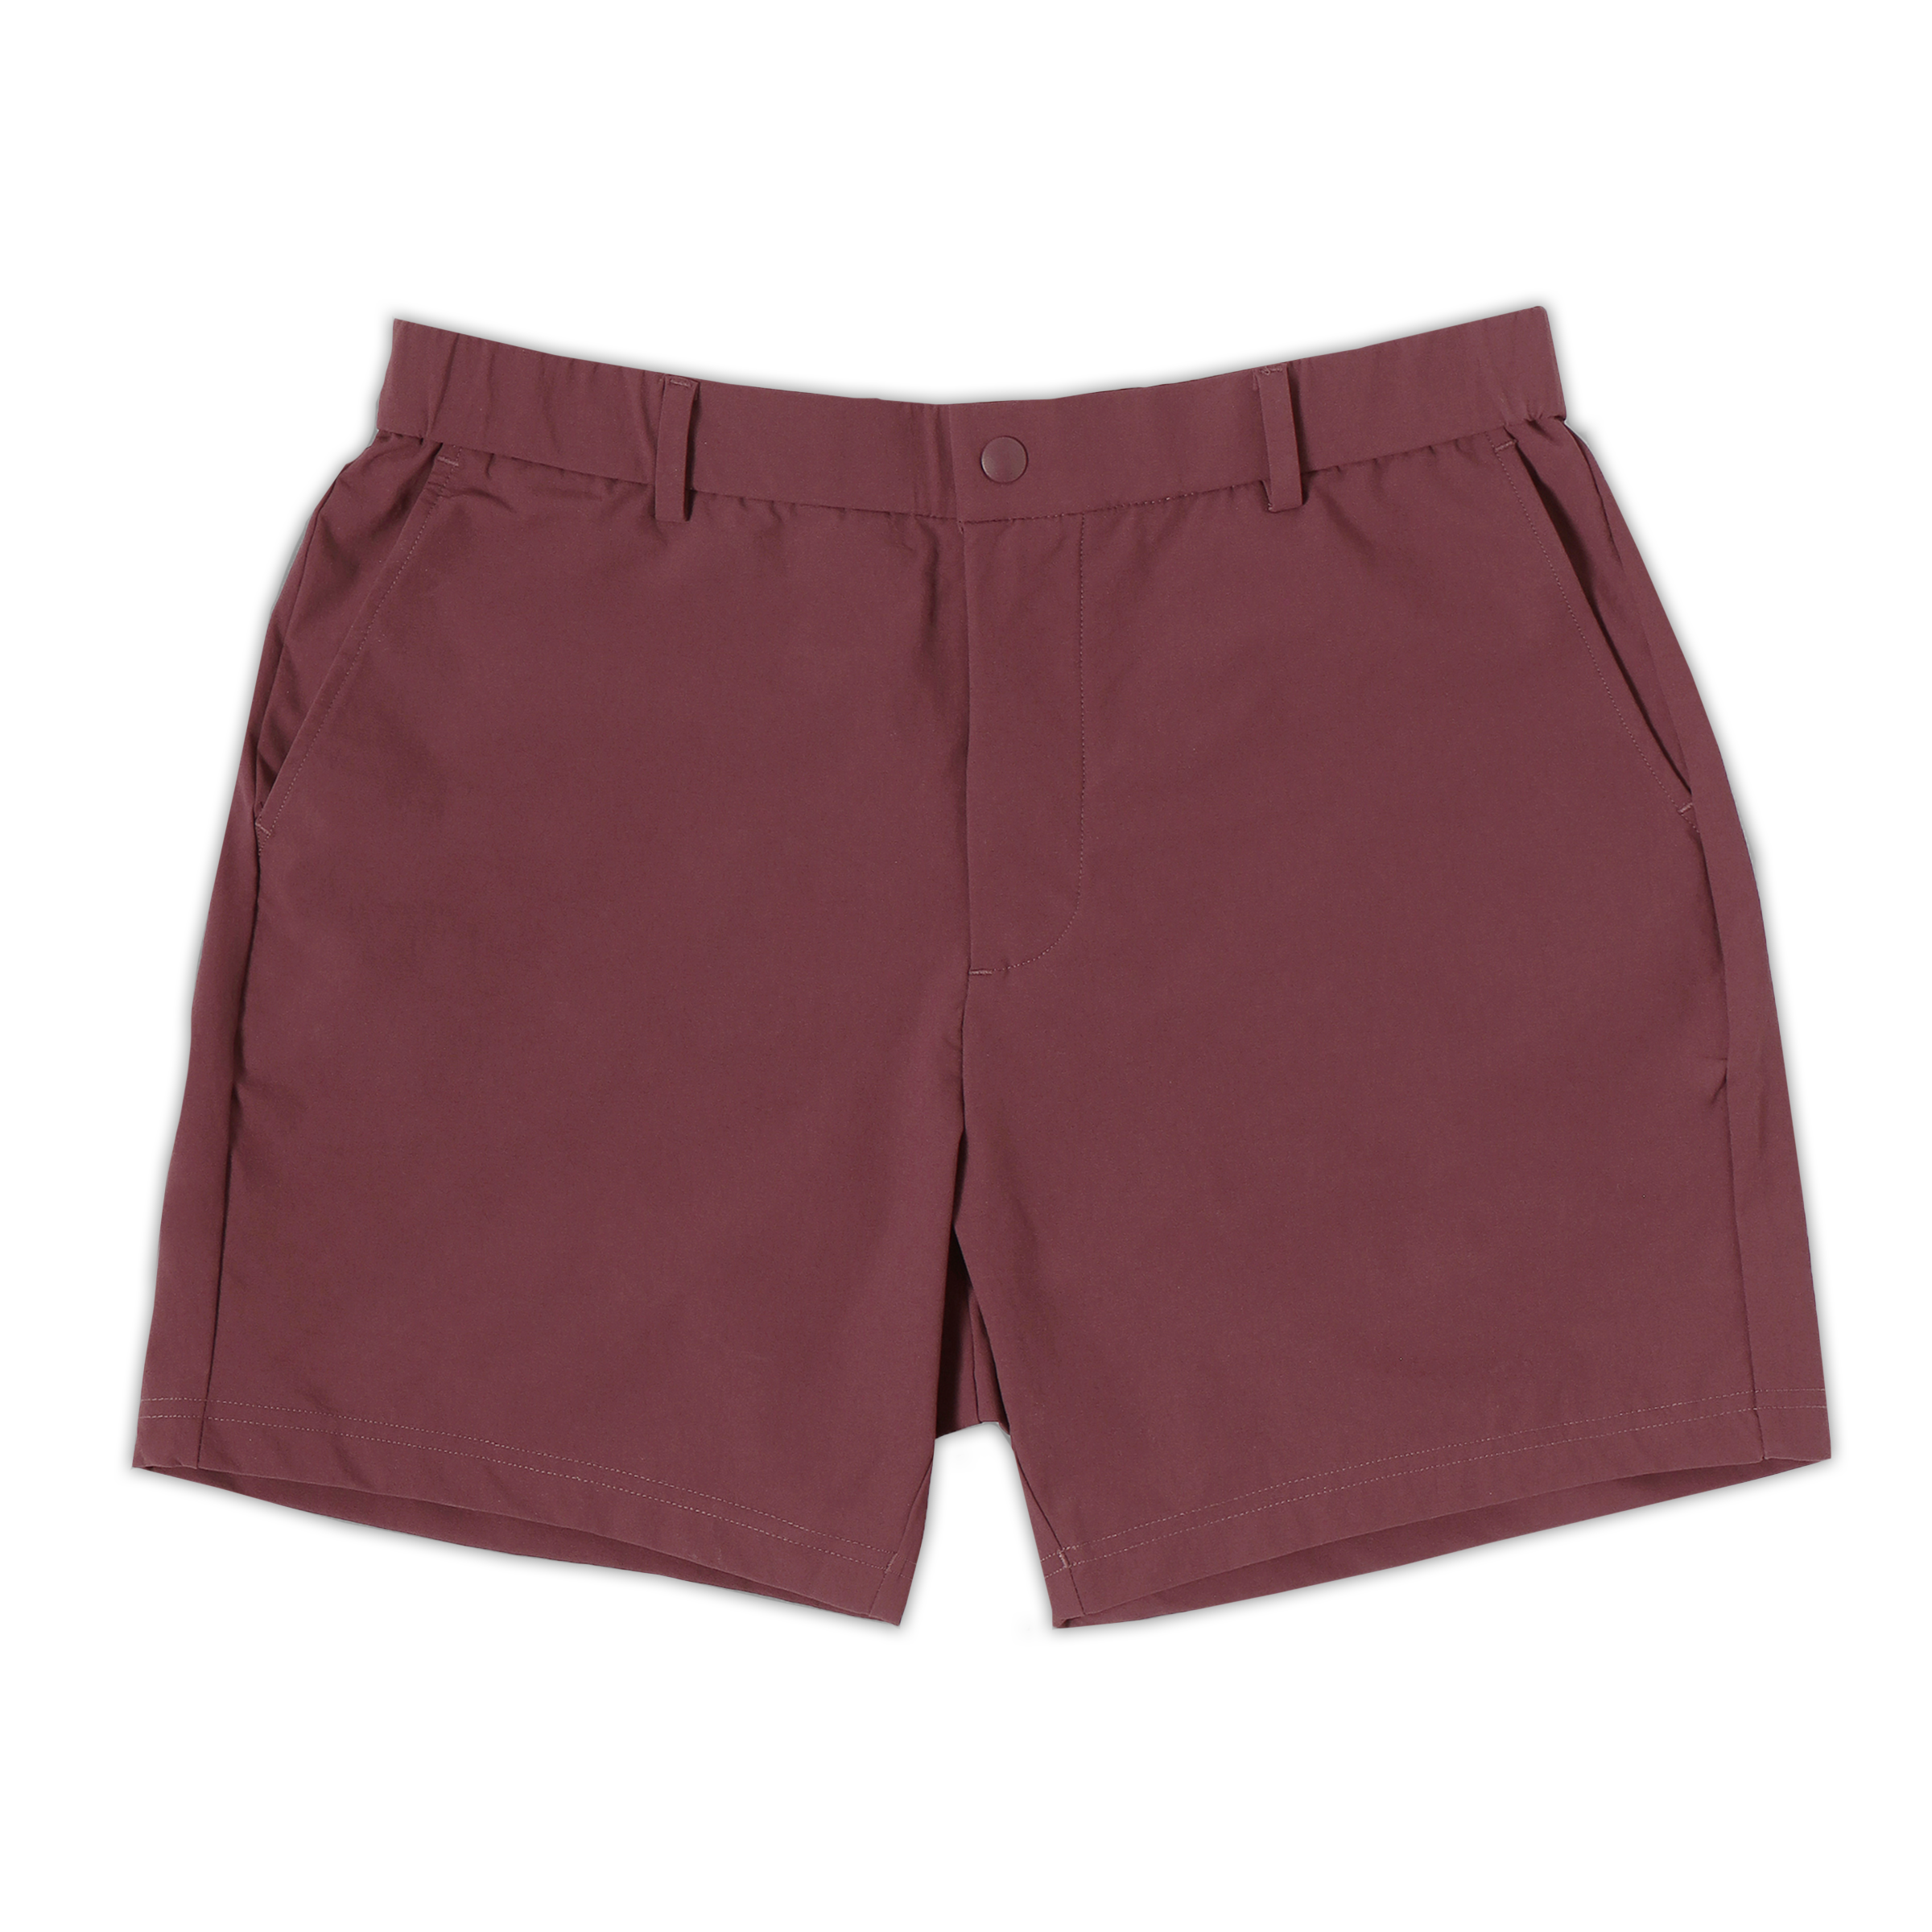 Tour Short 5.5" Wine with flat elastic waistband, belt loops, snap-button, zipper fly, and two front seam pockets